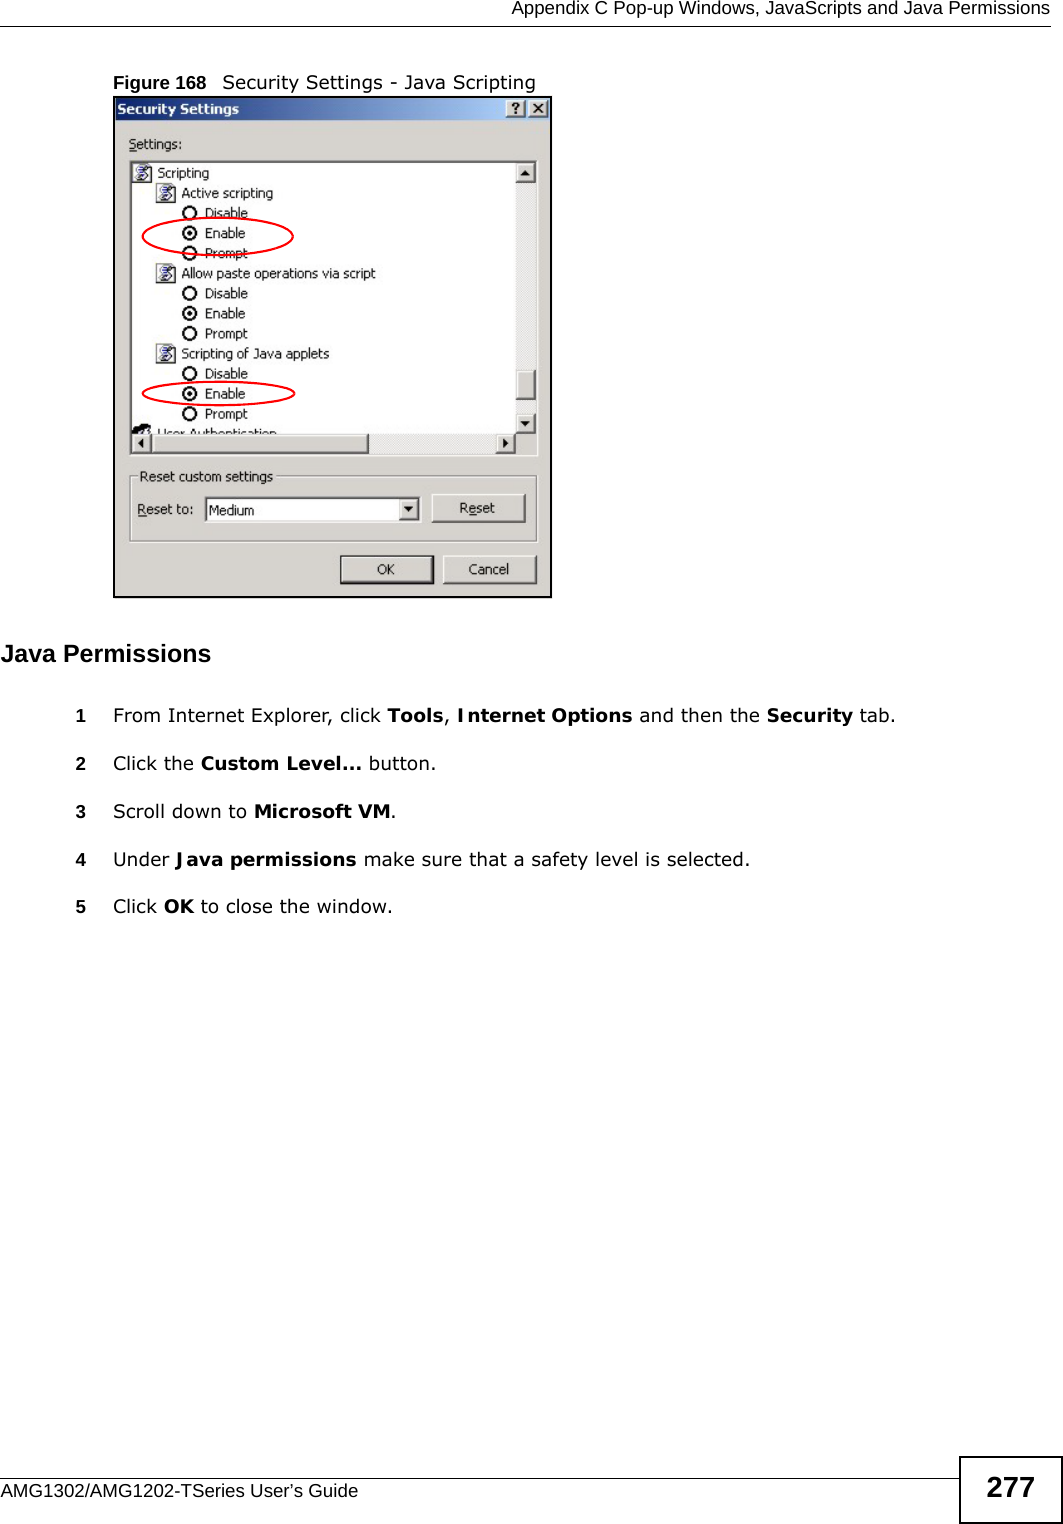  Appendix C Pop-up Windows, JavaScripts and Java PermissionsAMG1302/AMG1202-TSeries User’s Guide 277Figure 168   Security Settings - Java ScriptingJava Permissions1From Internet Explorer, click Tools, Internet Options and then the Security tab. 2Click the Custom Level... button. 3Scroll down to Microsoft VM. 4Under Java permissions make sure that a safety level is selected.5Click OK to close the window.